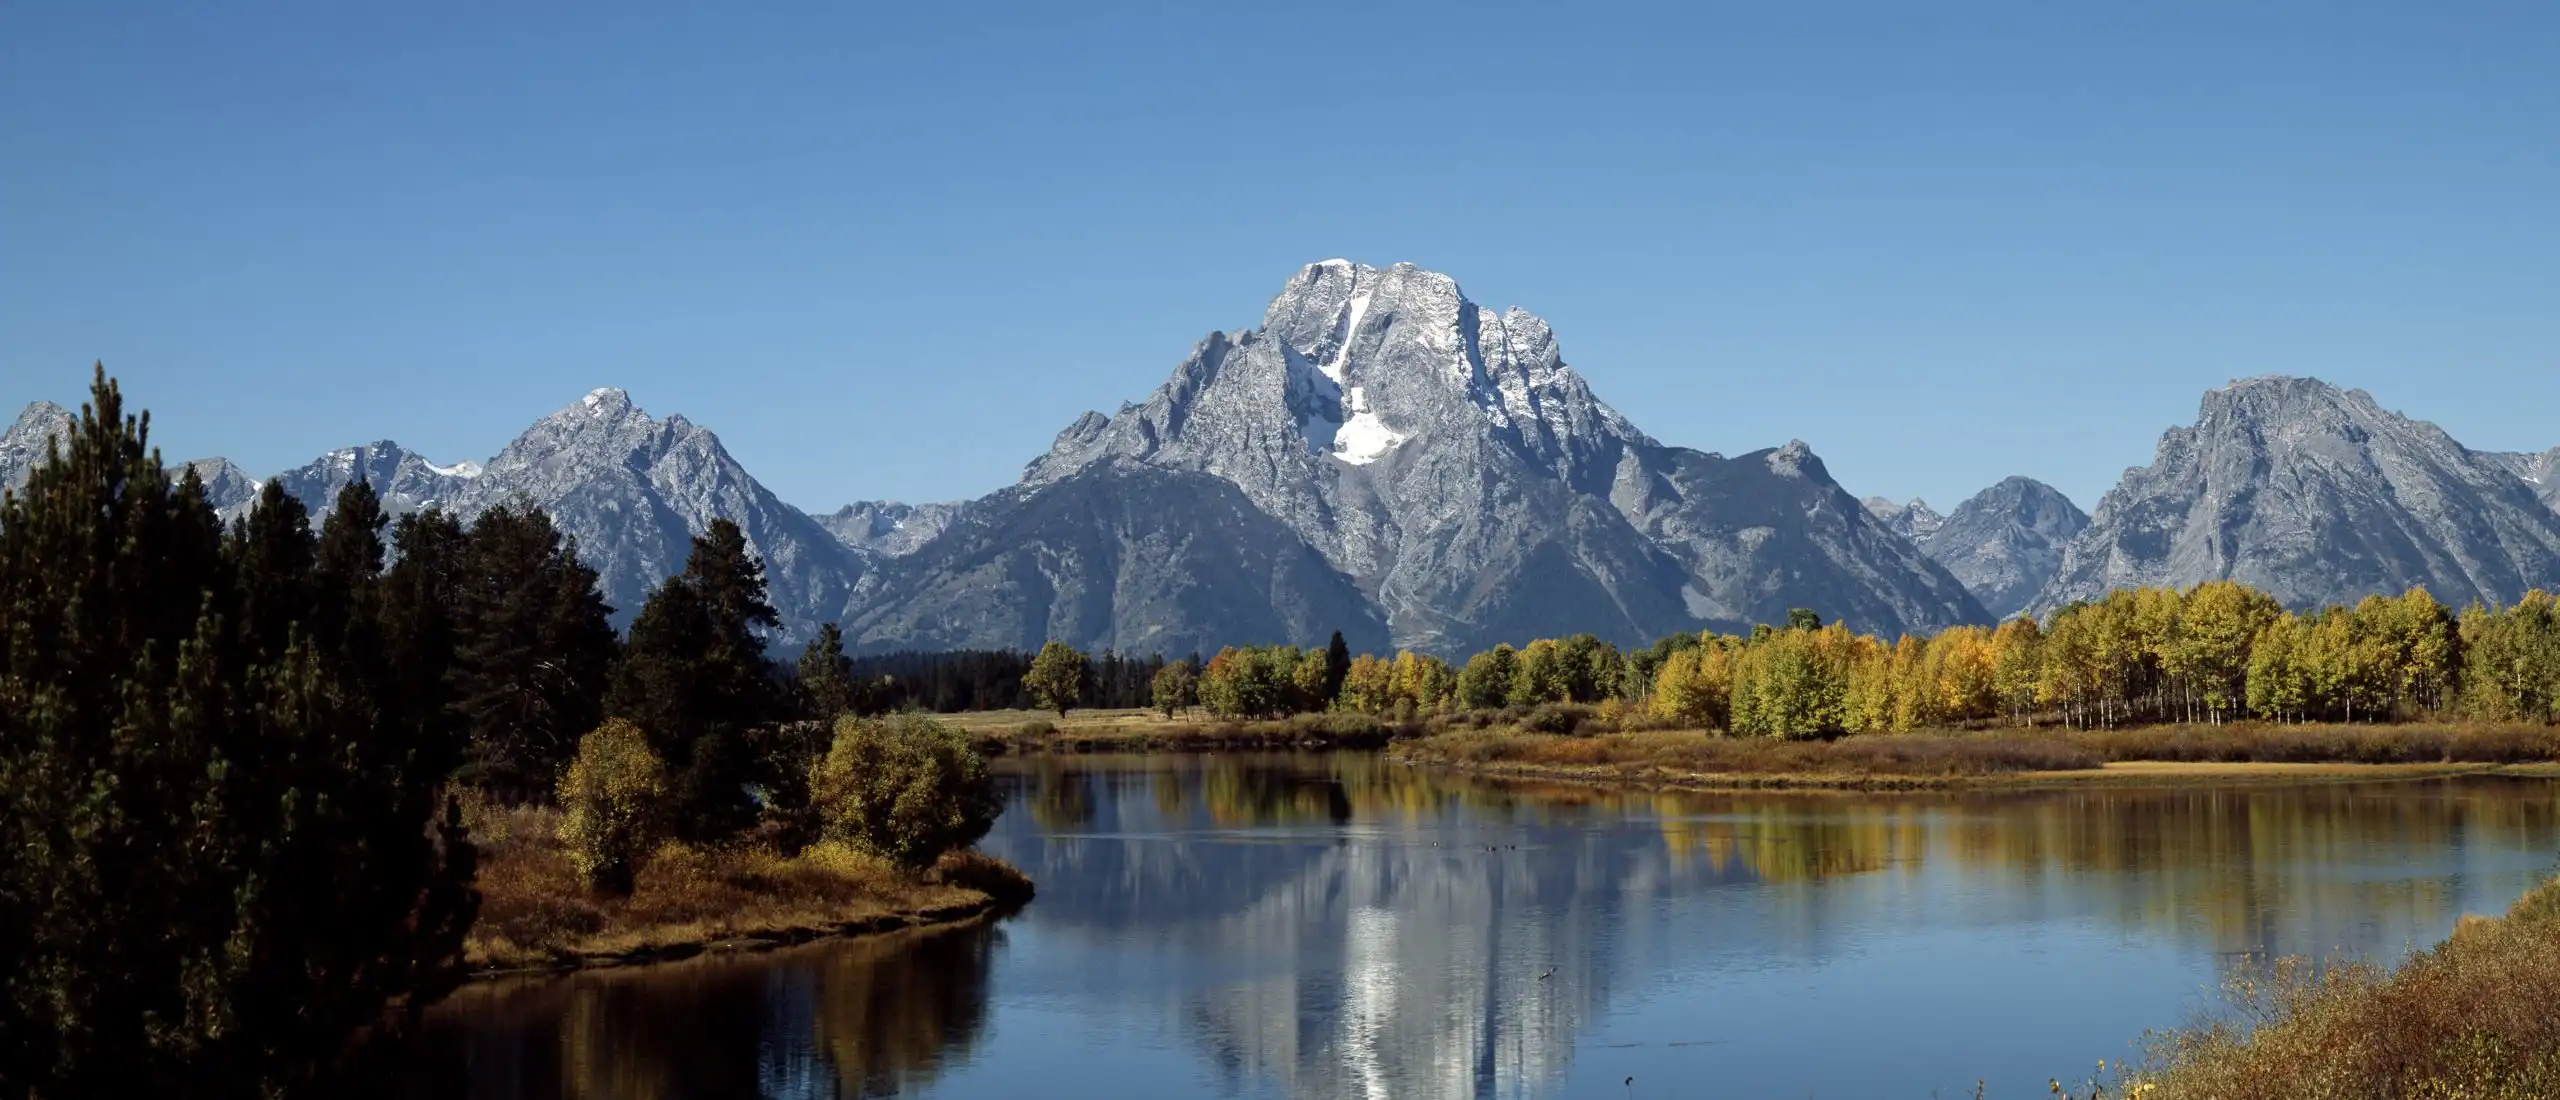 Catastrophically Failed Wyoming Teton Pass Collapse Emergency Declaration